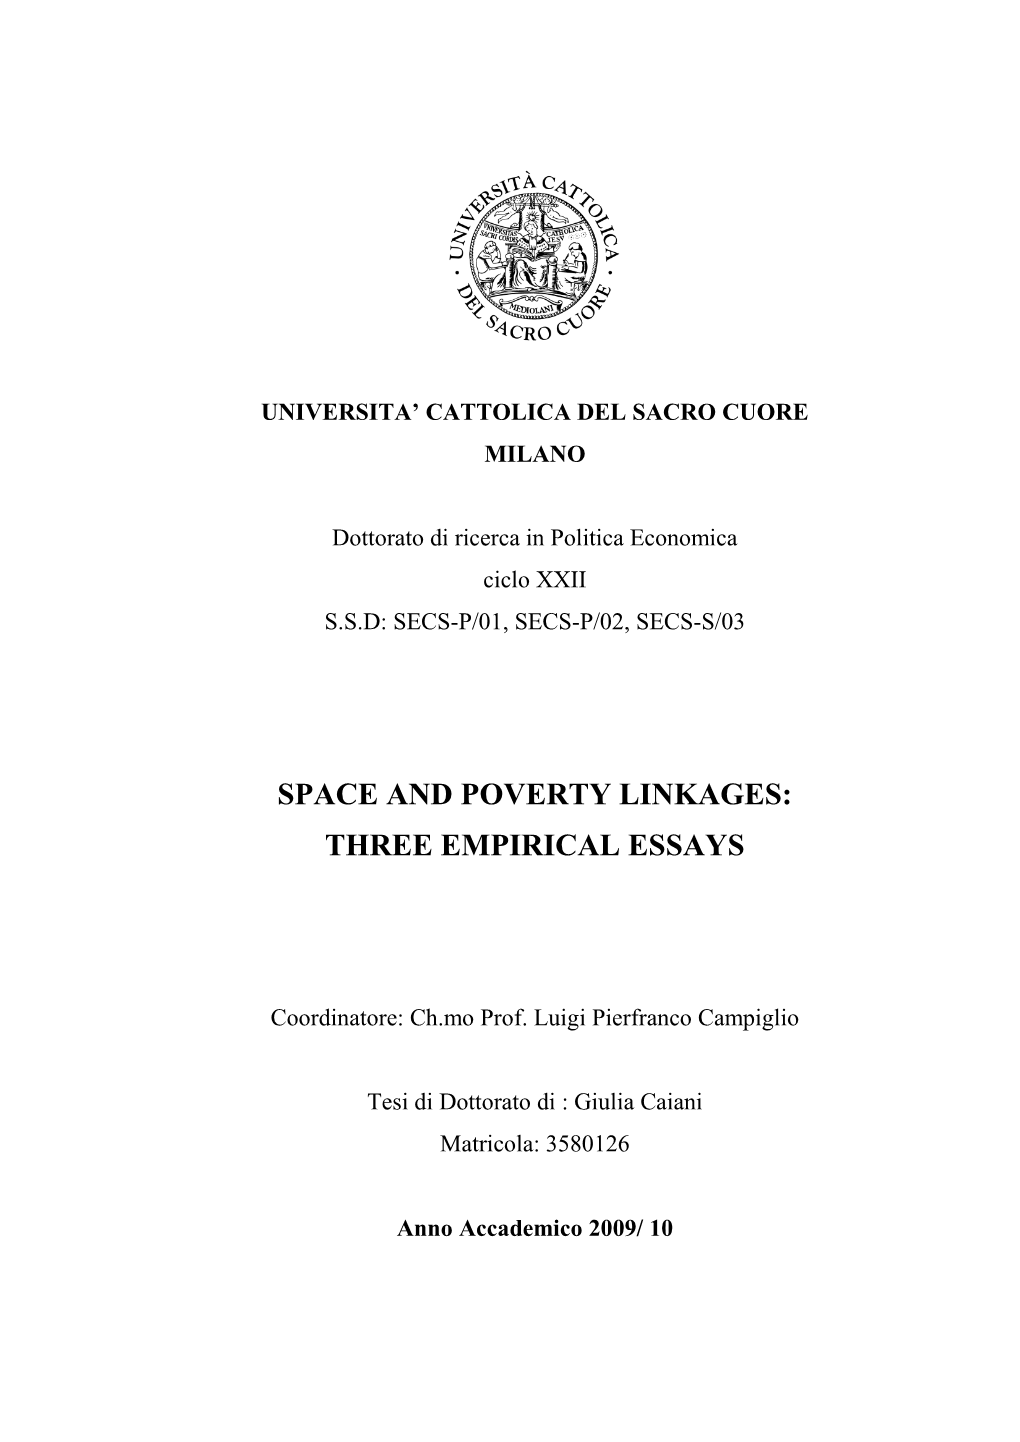 Space and Poverty Linkages: Three Empirical Essays